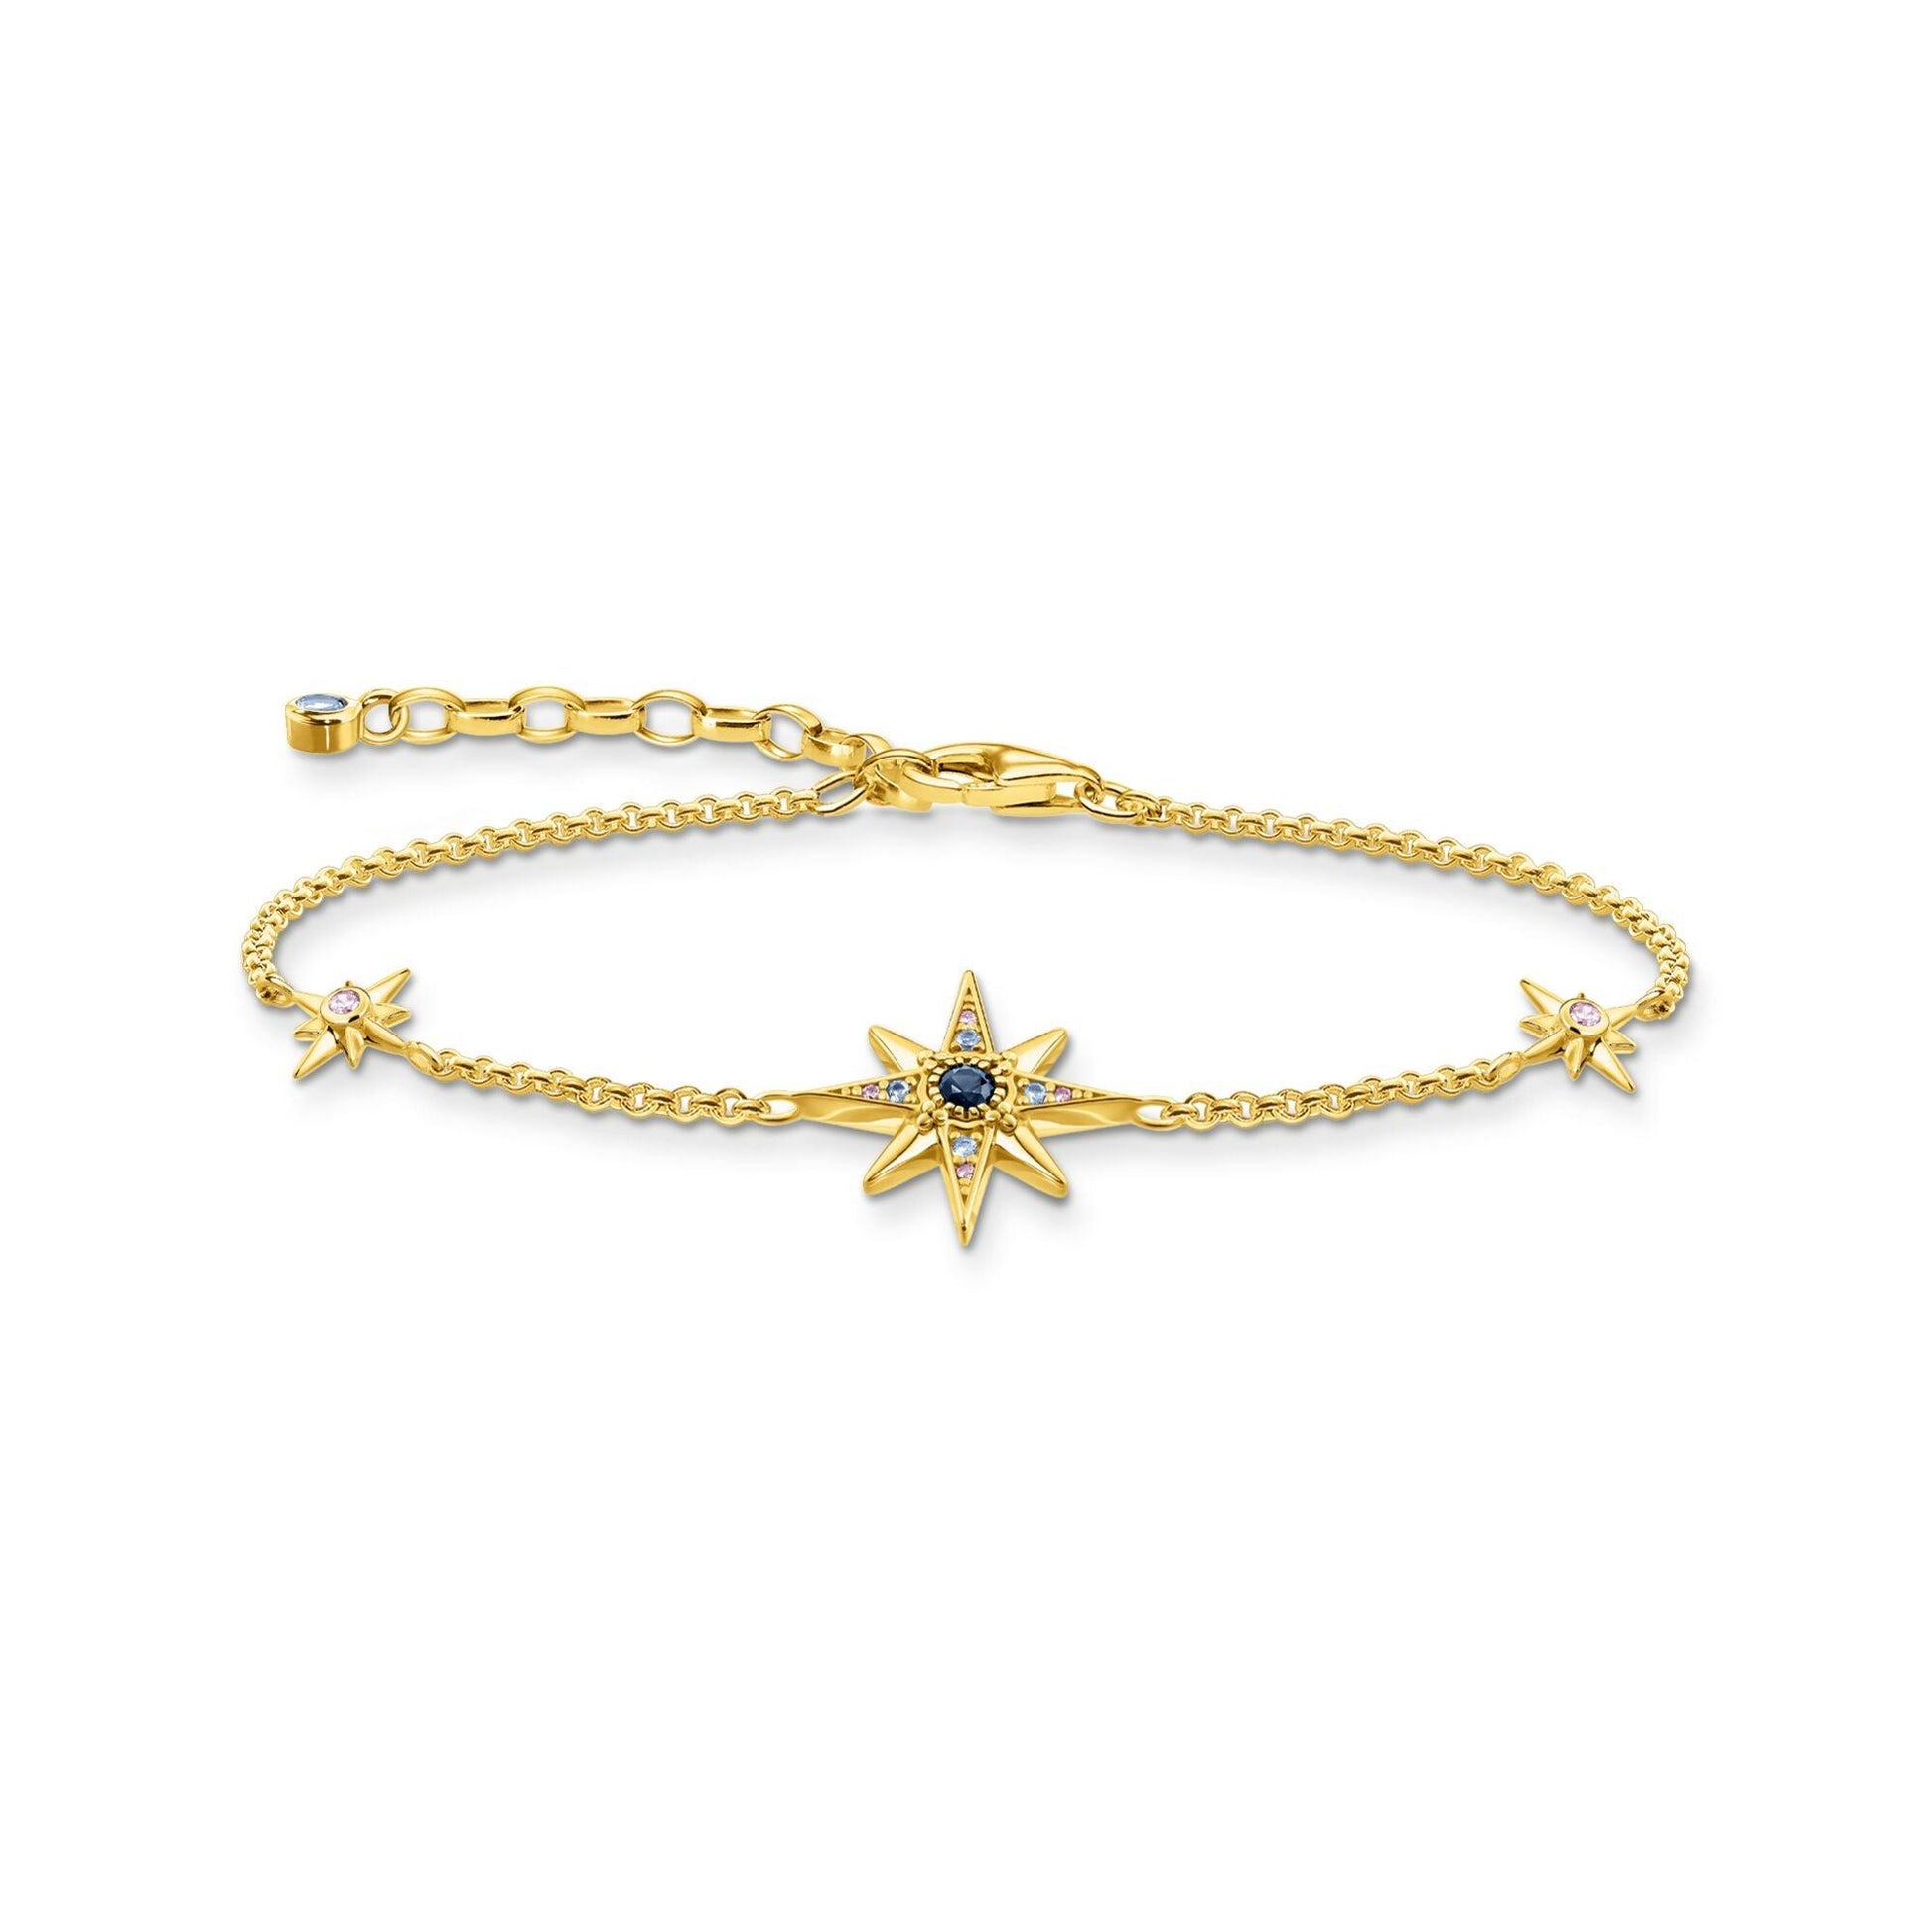 Thomas Sabo Yellow Gold-Plated Royalty Star Bracelet A2037 - Judith Hart Jewellers